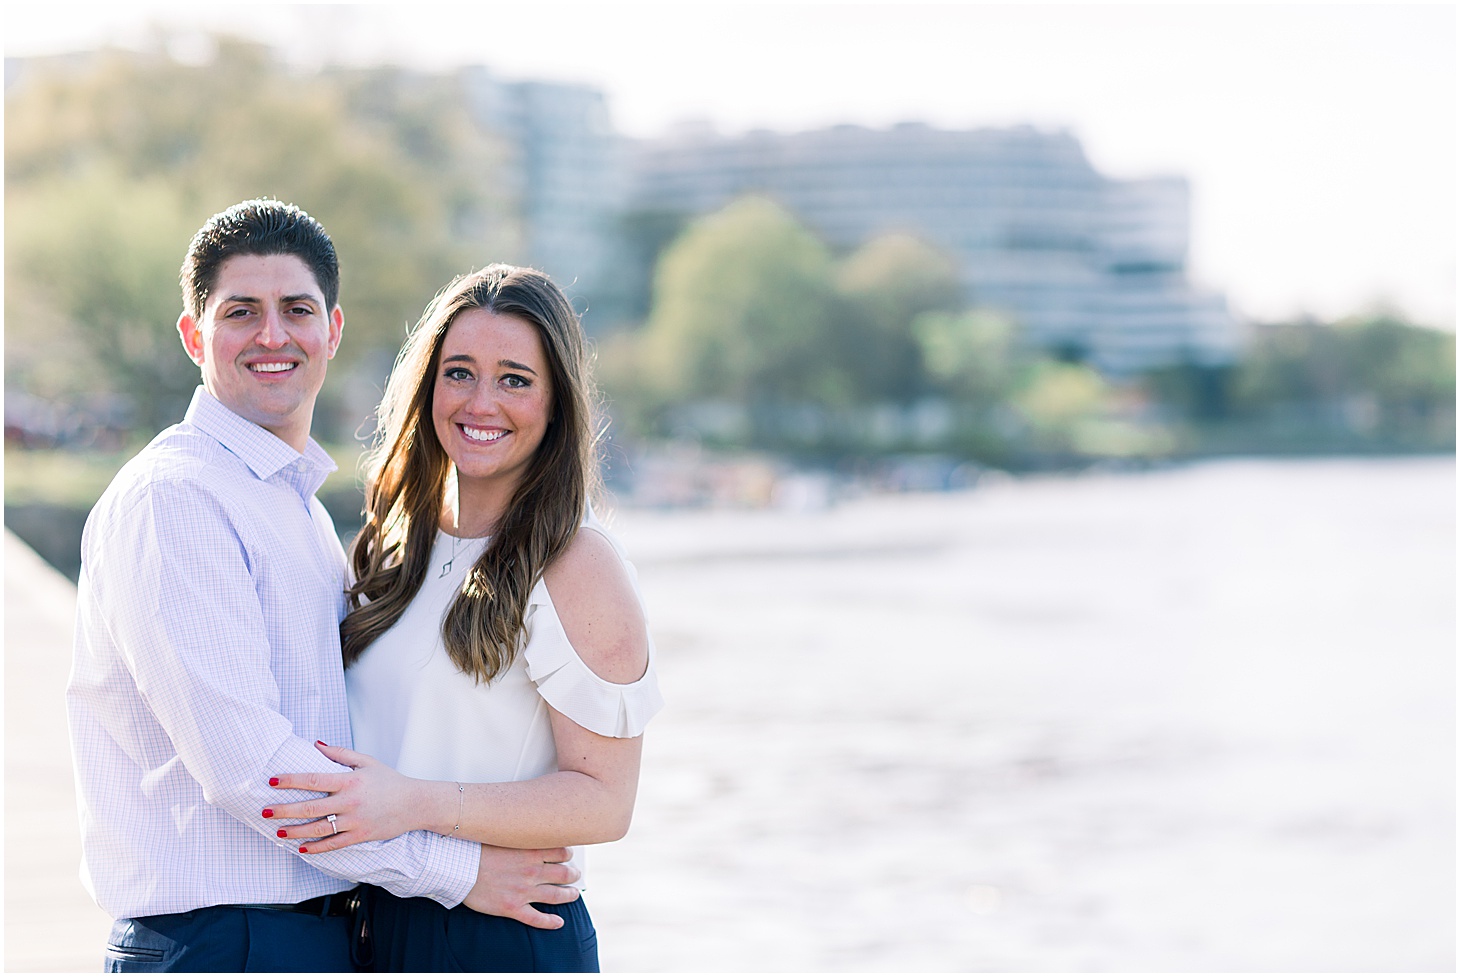 Engagement Portraits at Georgetown Waterfront, Stylish Sunrise Engagement Session at Lincoln Memorial, Sarah Bradshaw Photography